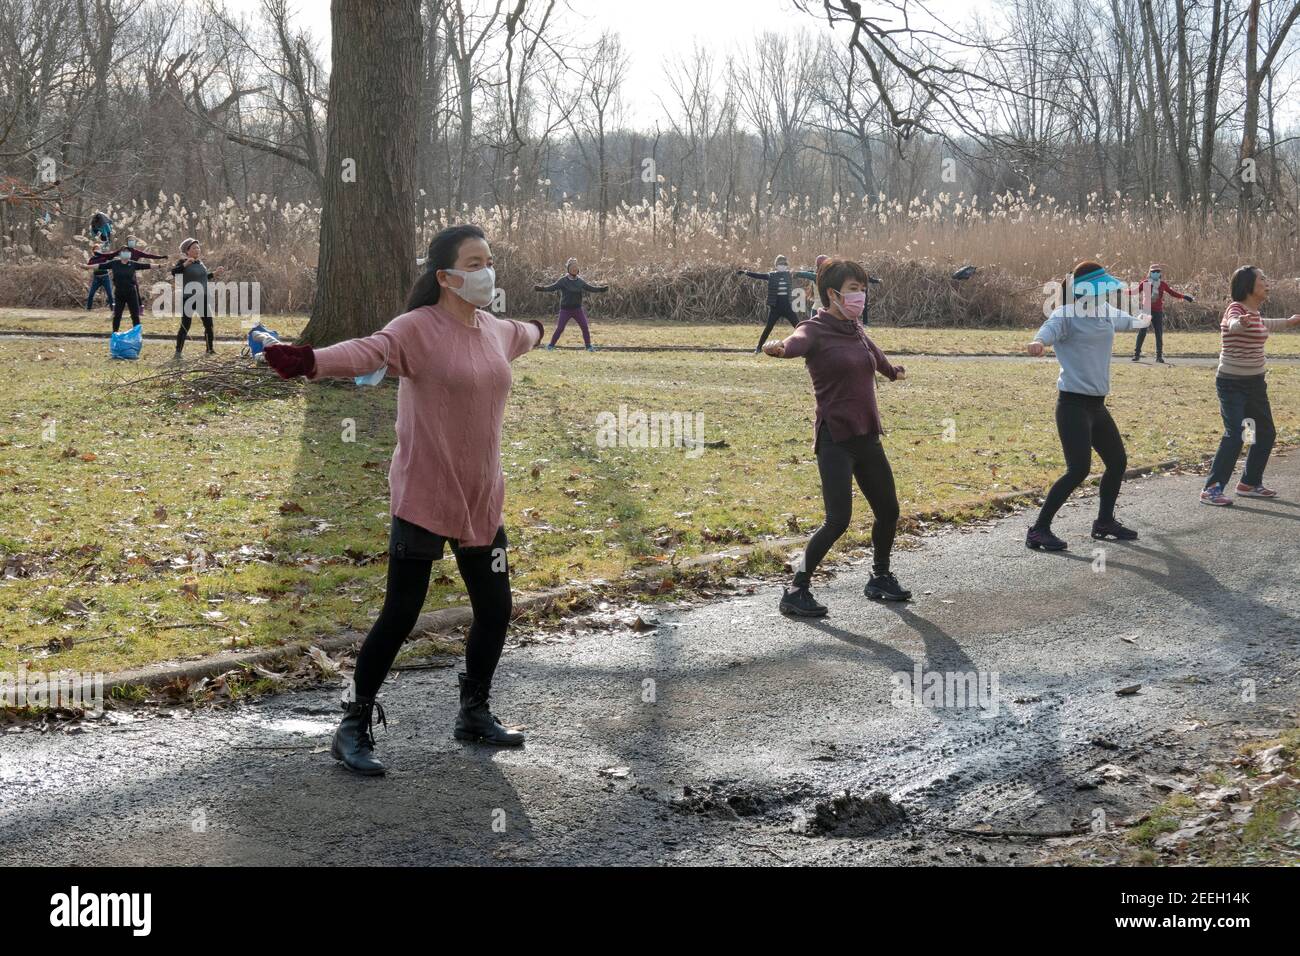 On a mild winter morning, Asian American women, primarily Chinese, attend a dance exercise class in a park in Flushing, Queens, New York City. Stock Photo